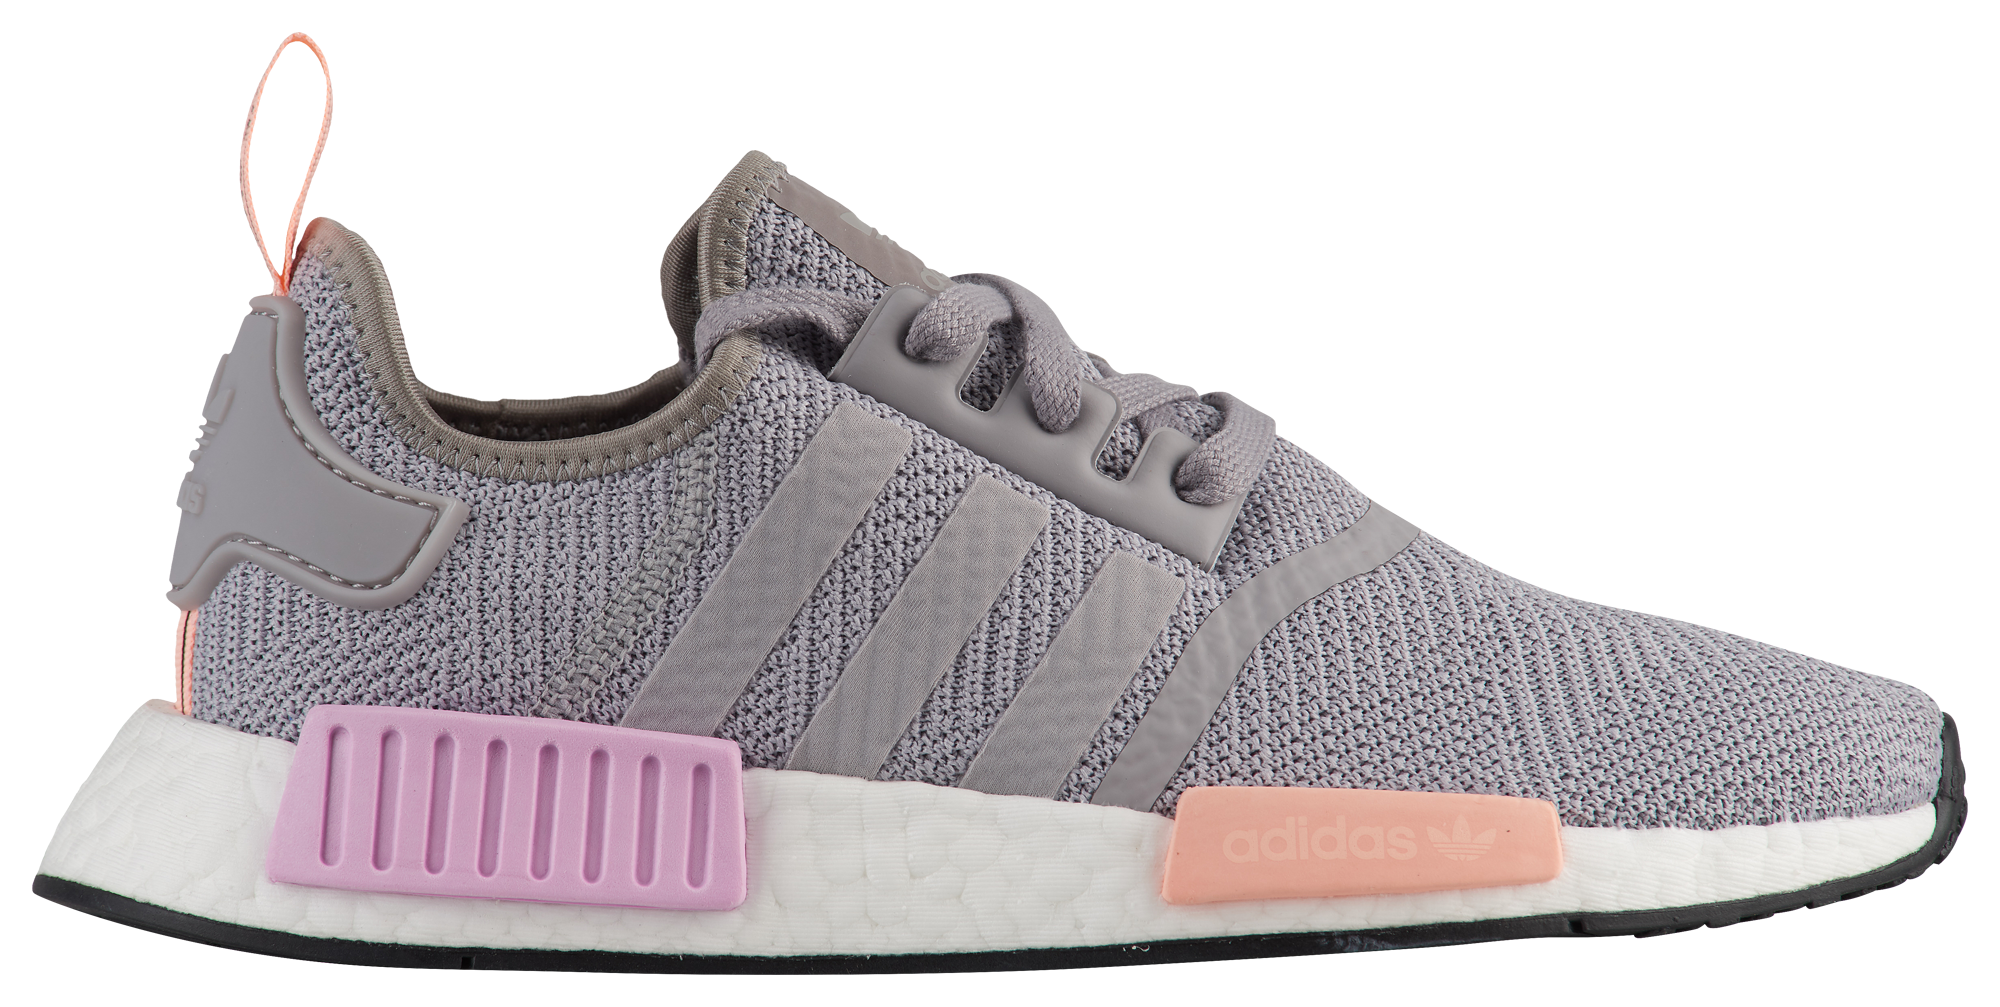 Adidas nmd r1 primeknit pink rose bb2363 ideas for my lil